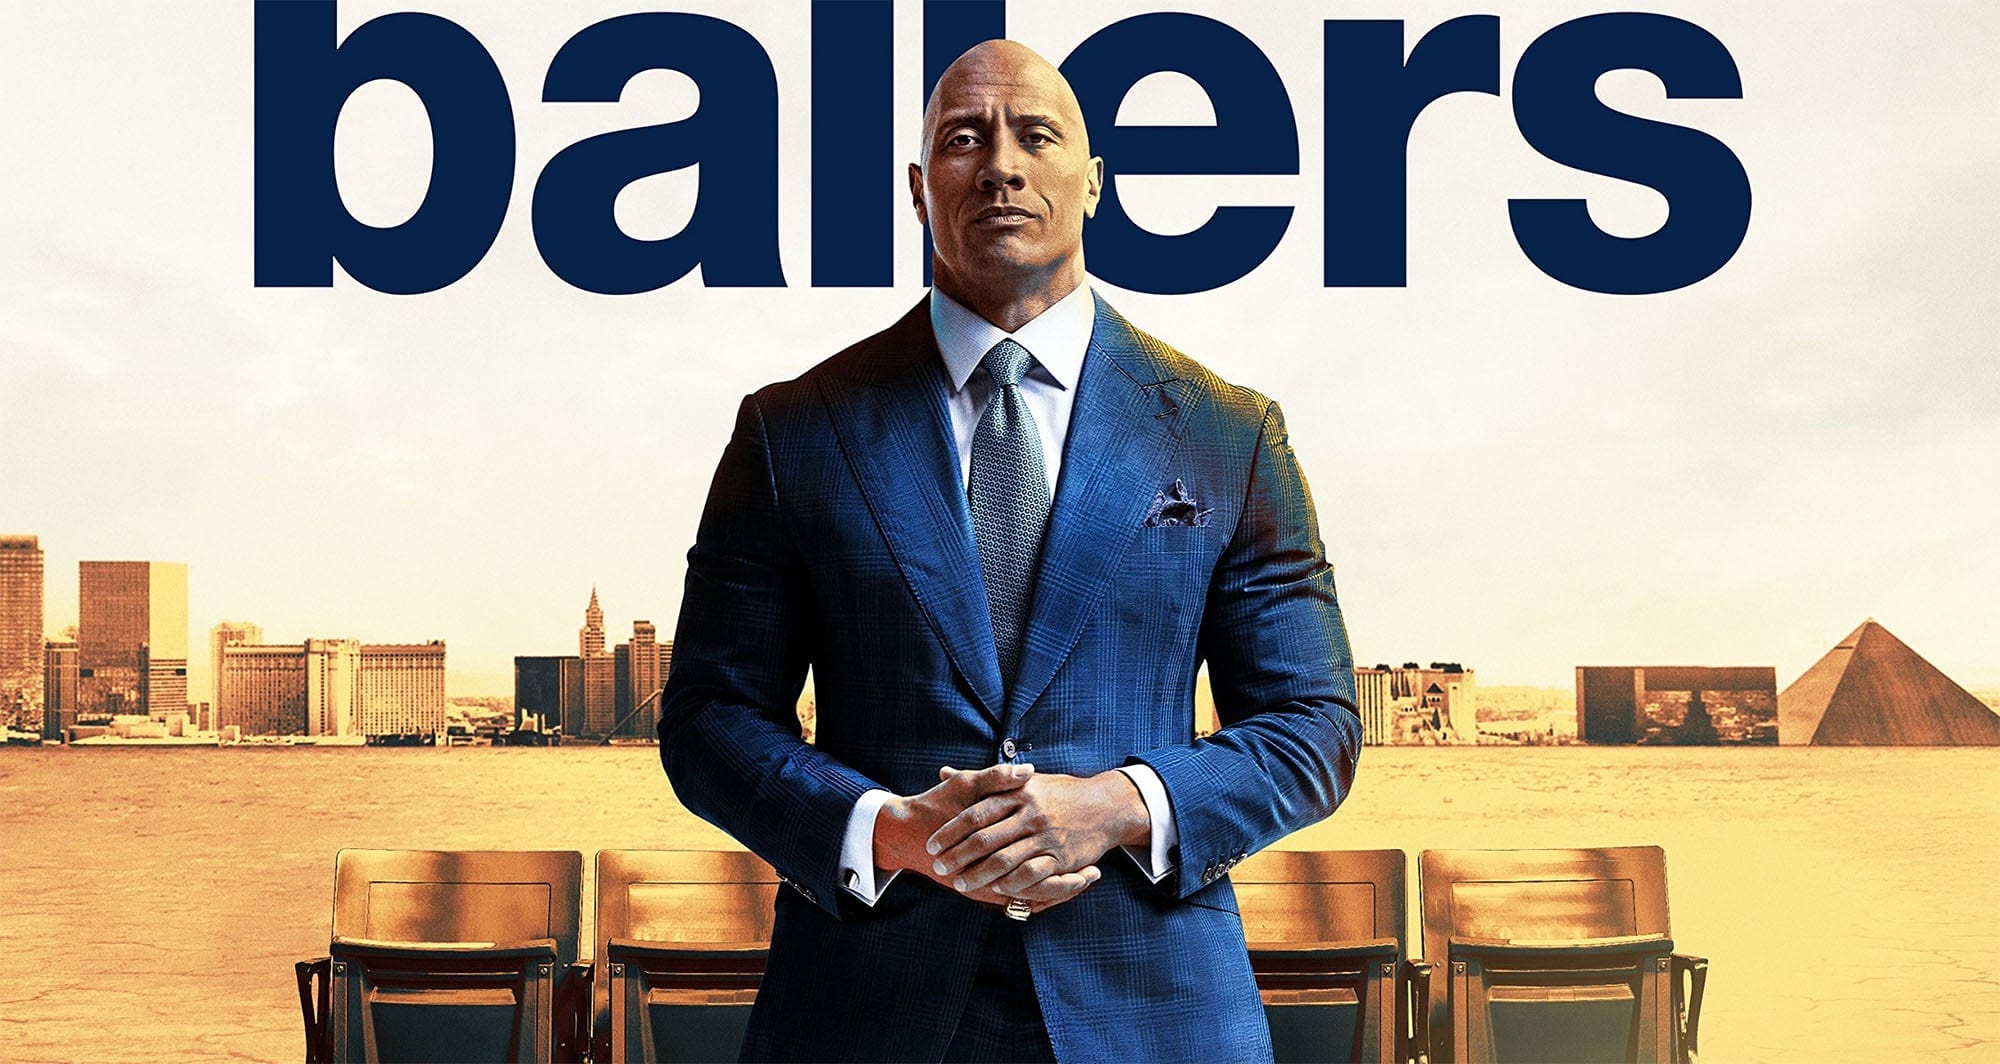 Do you want to see Dwayne ‘The Rock’ Johnson play a gaudy agent? Check out the best ‘bad’ shows on TV.